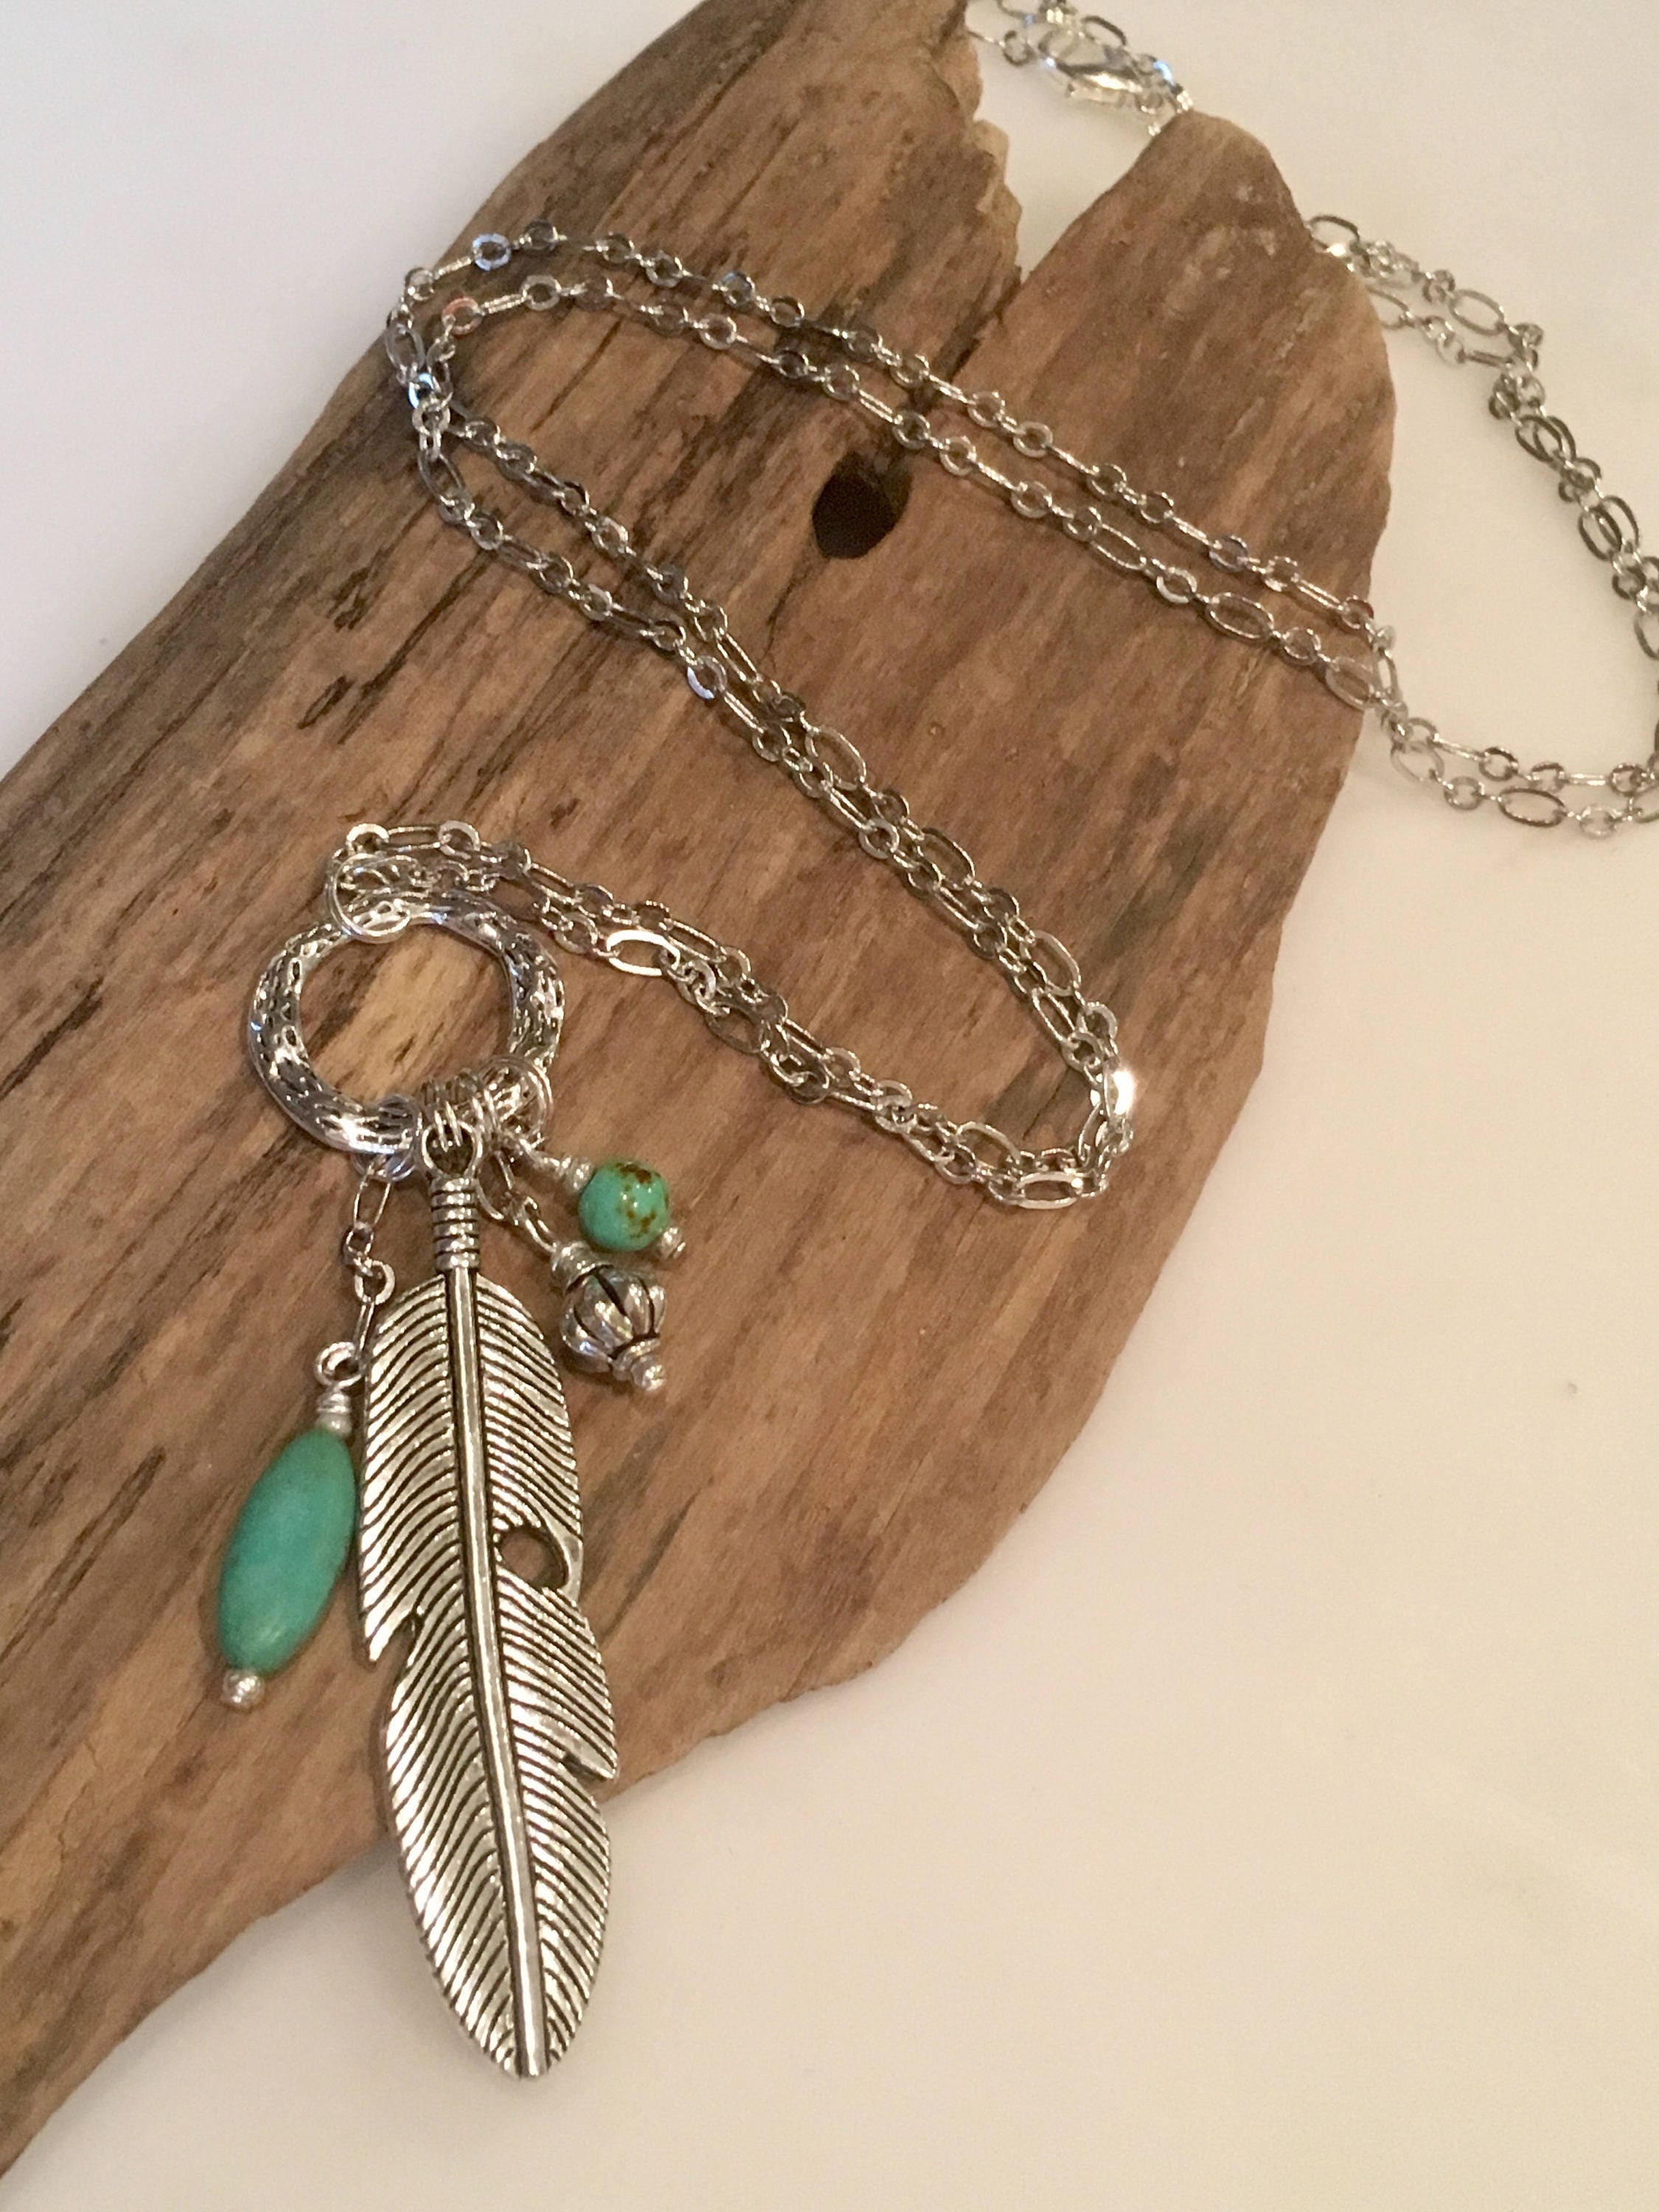 Boho Pendant Necklace Silver Feather with turquoise stones | Etsy